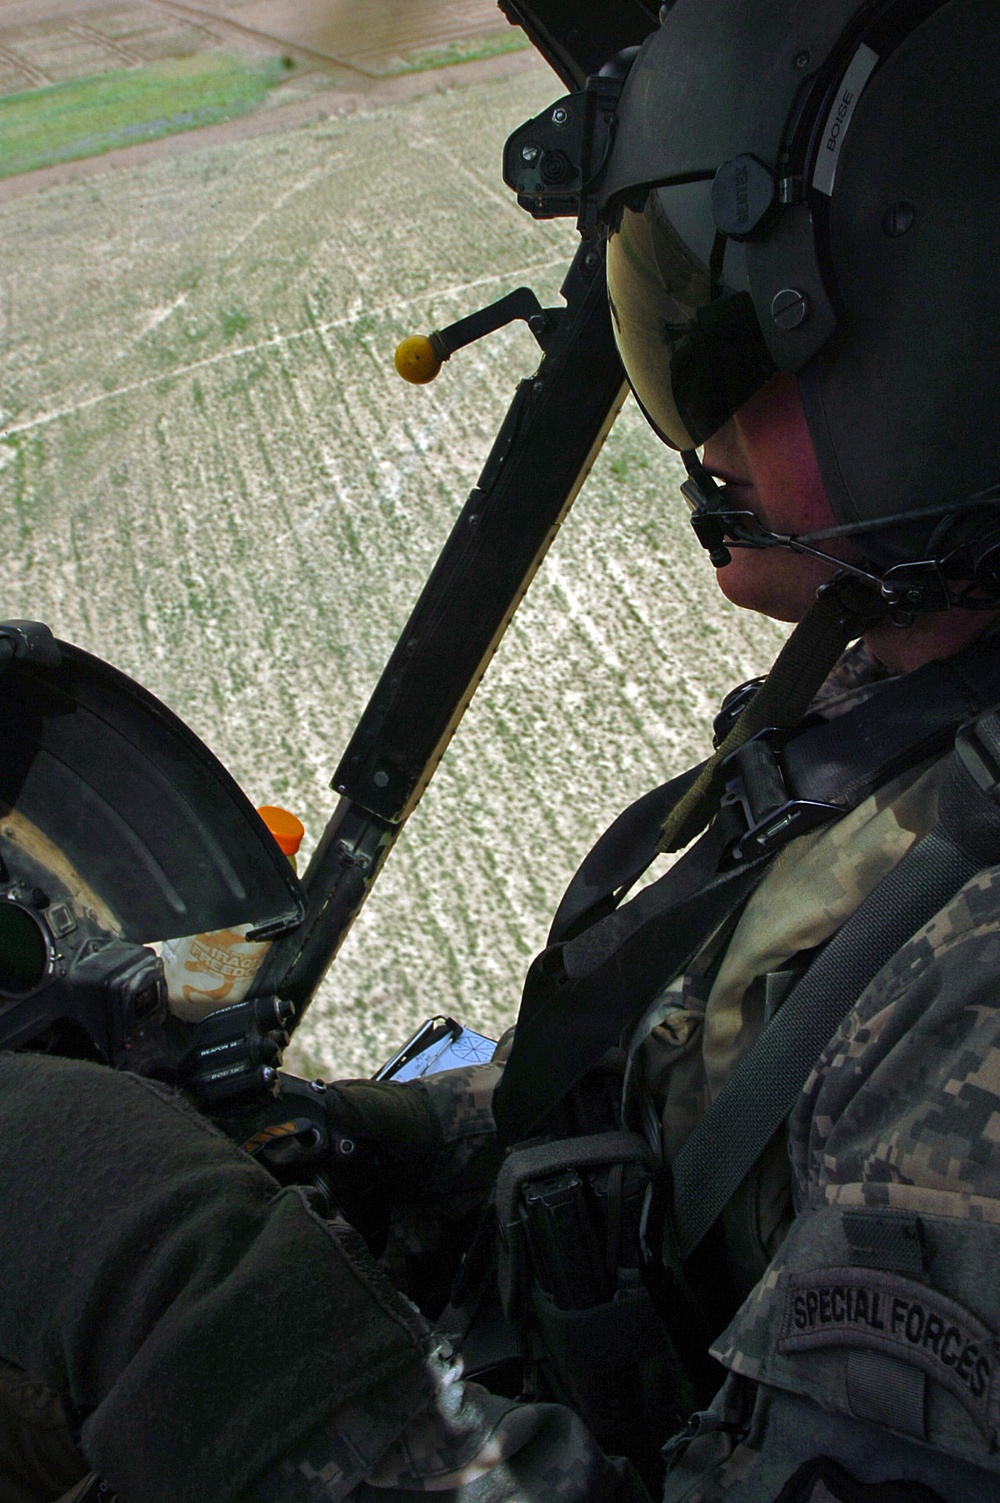 Scout-attack Helicopters Got Your Back; Redcatcher Soldiers Team Effort Keeps Eyes in the Sky